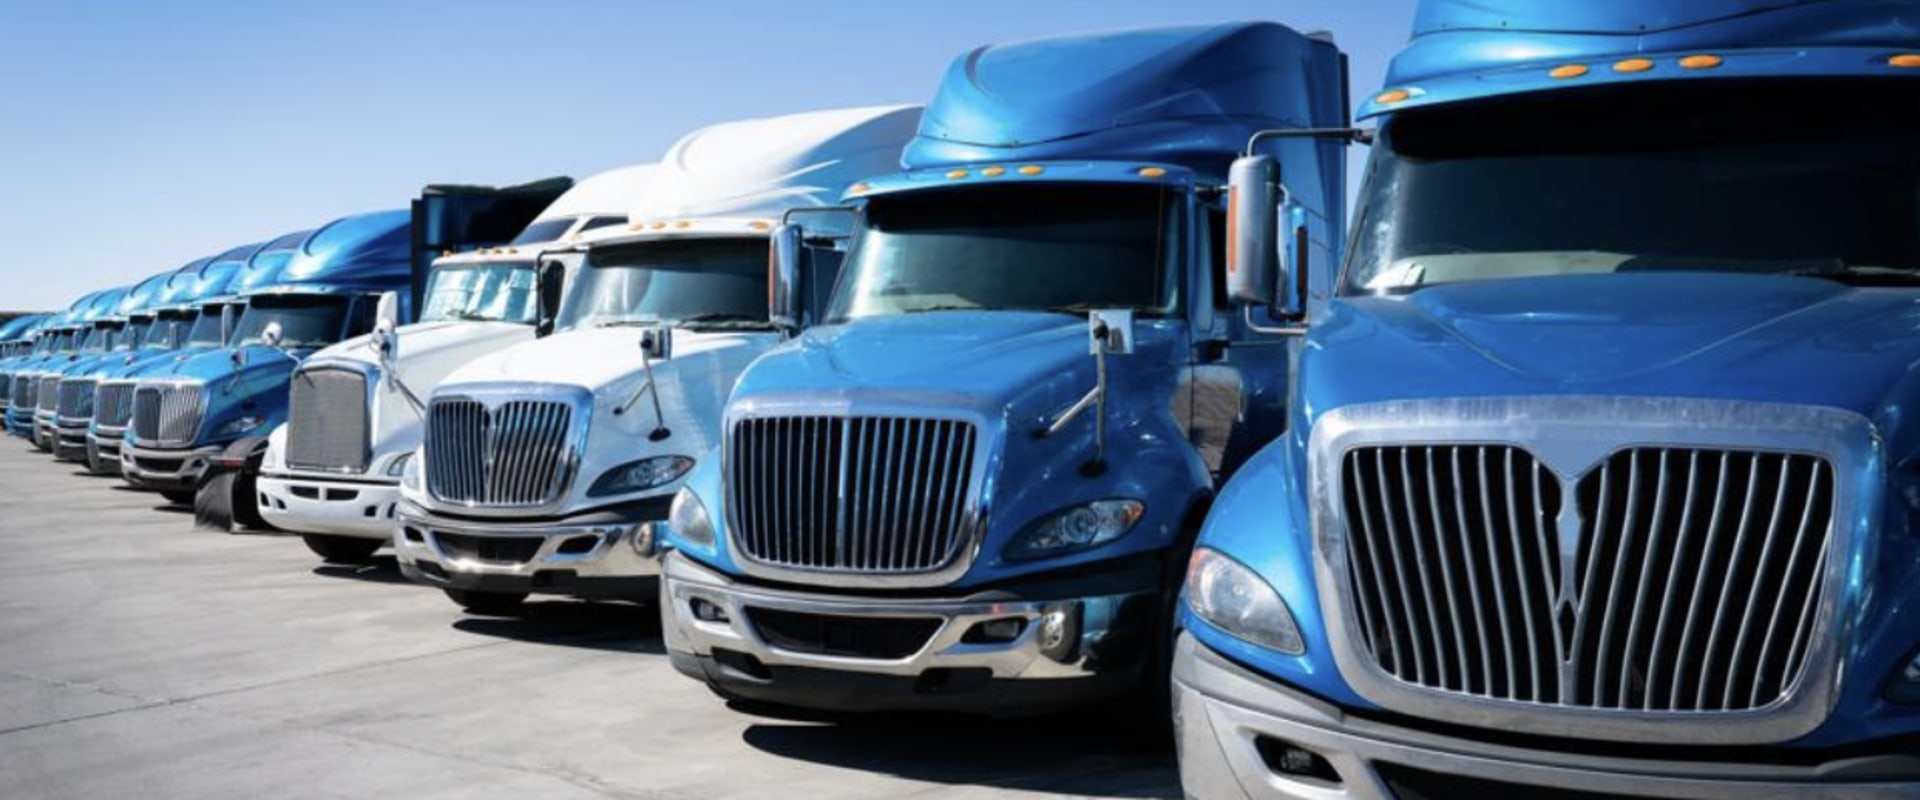 Reduced Fuel Costs: How Trucking Dispatch Software Can Help Optimize Operations and Save Money